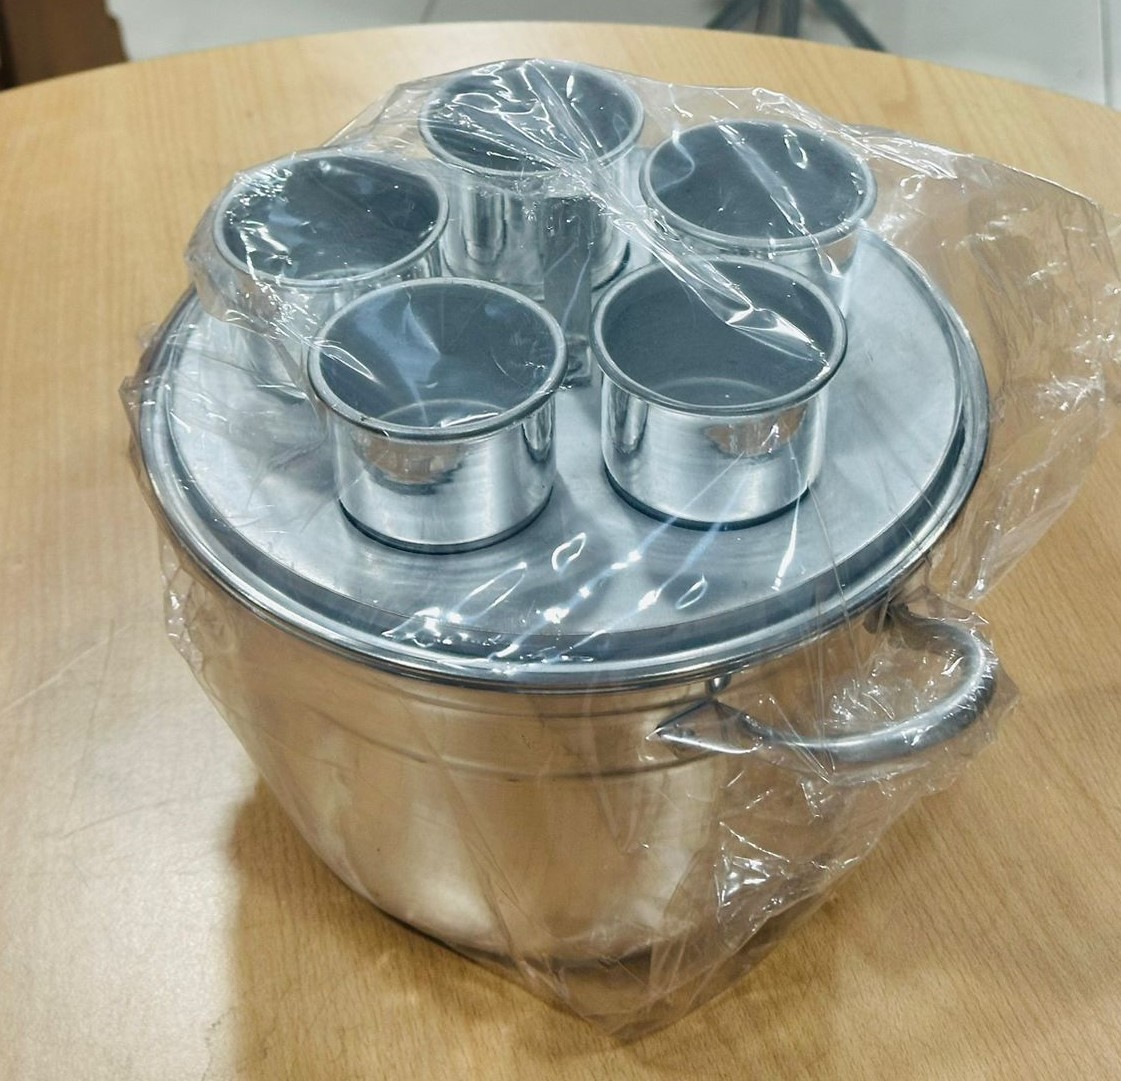 High Quality Aluminum Pot with Five Small Pots